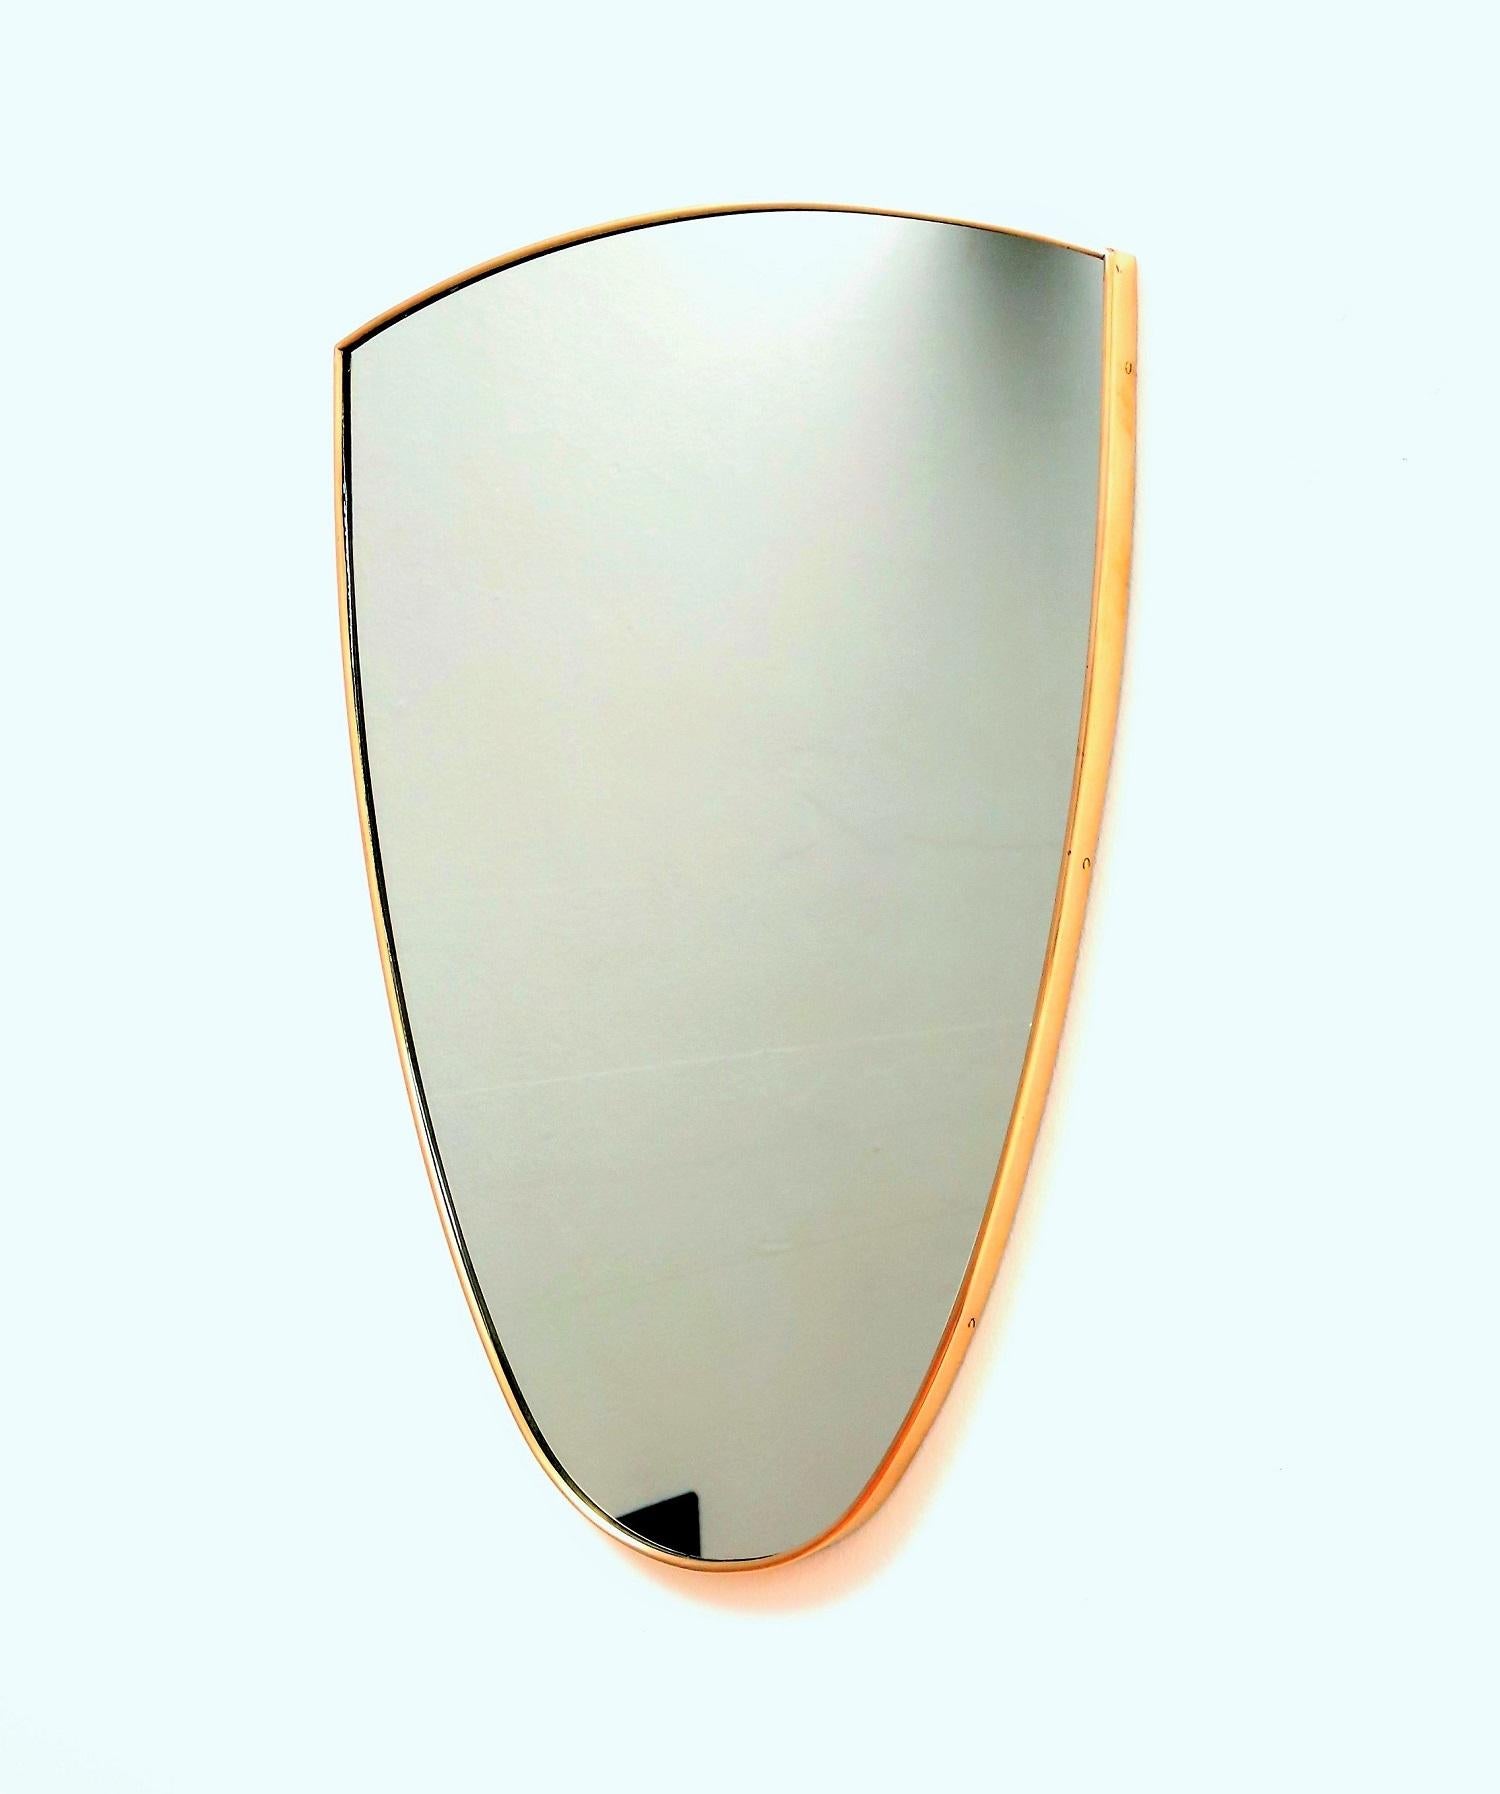 Beautiful and elegant wall mirror with deep solid brass frame and crystal mirror glass.
Made in Italy in the 1950s.
The brass frame have been polished but we left just a little patina.
The mirrored glass have been renewed, therefore the mirror is